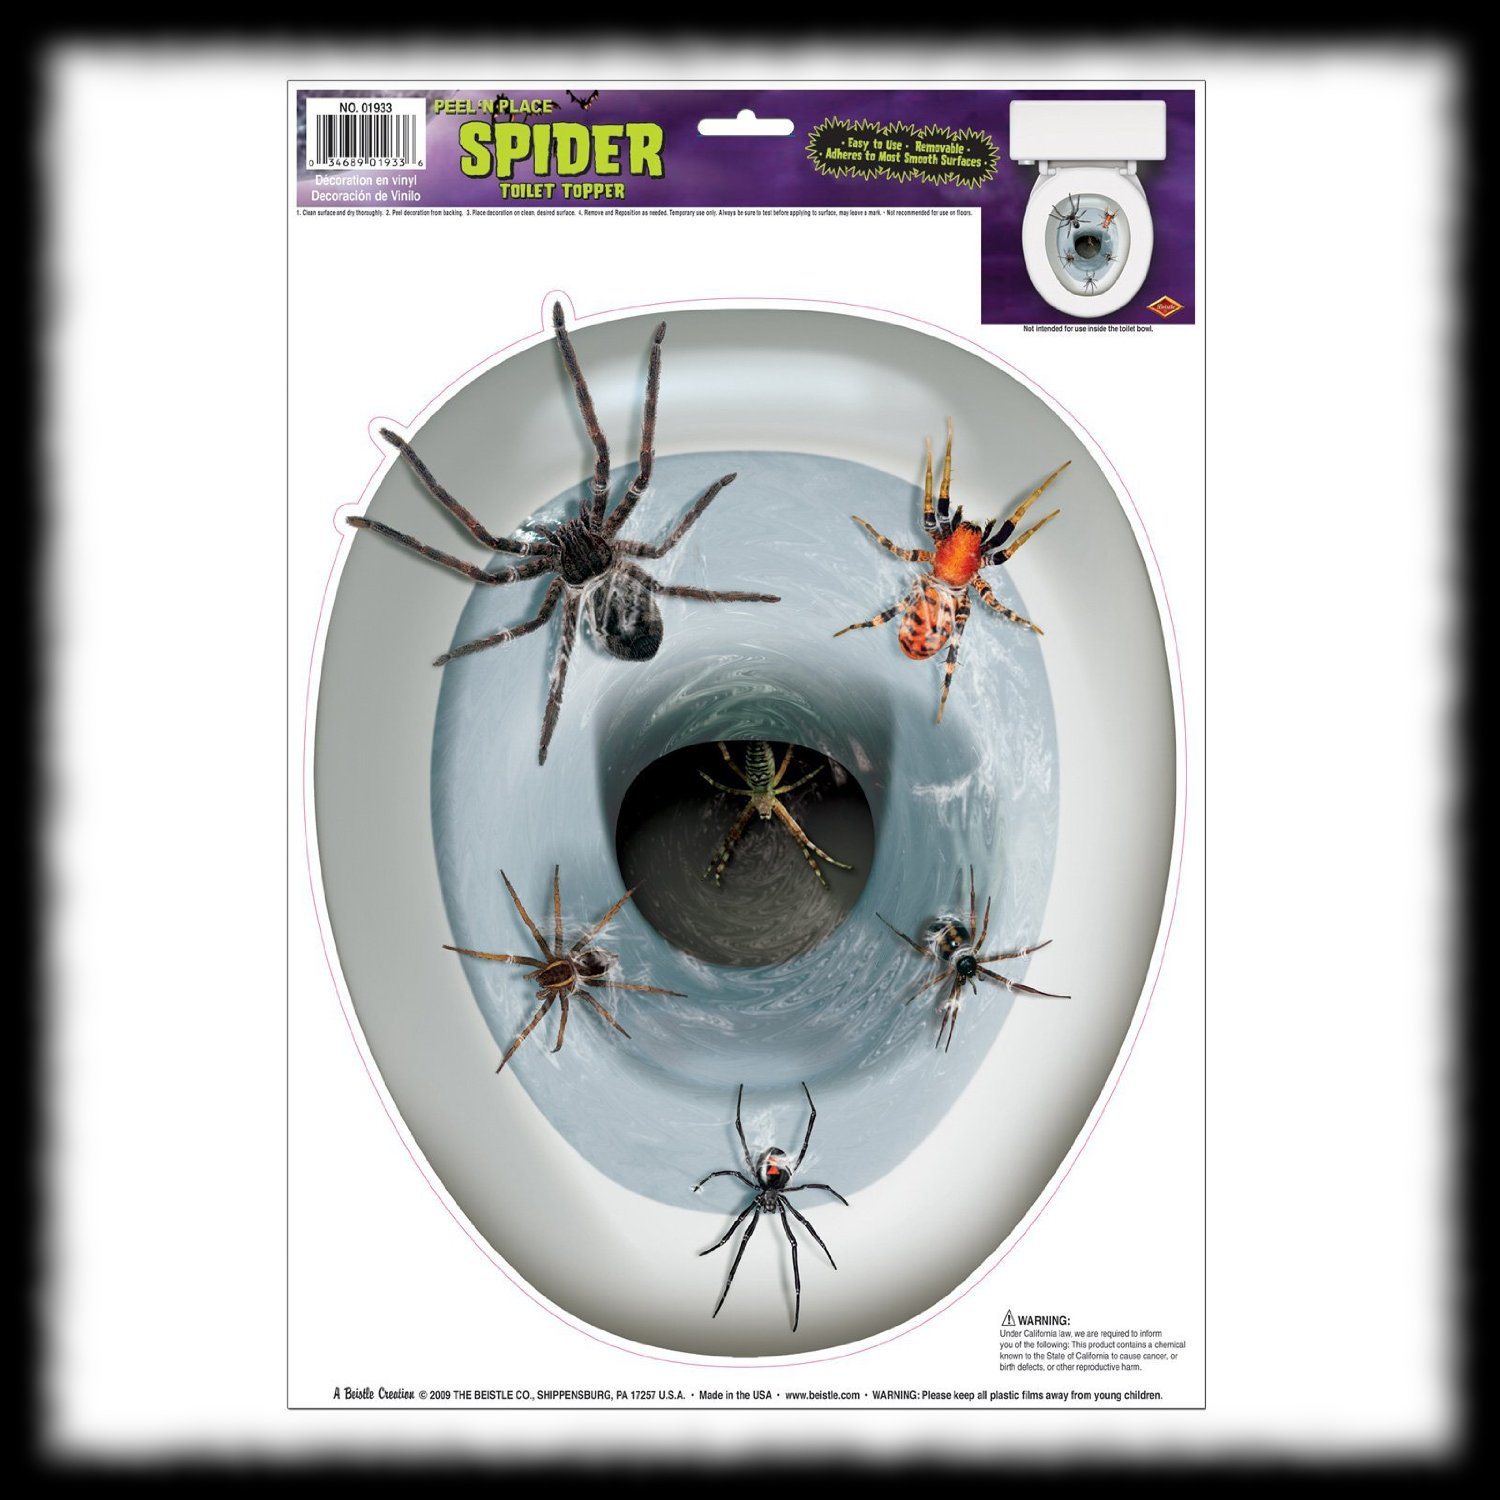 Spider toilet seat cling for sale Halloween practical jokes